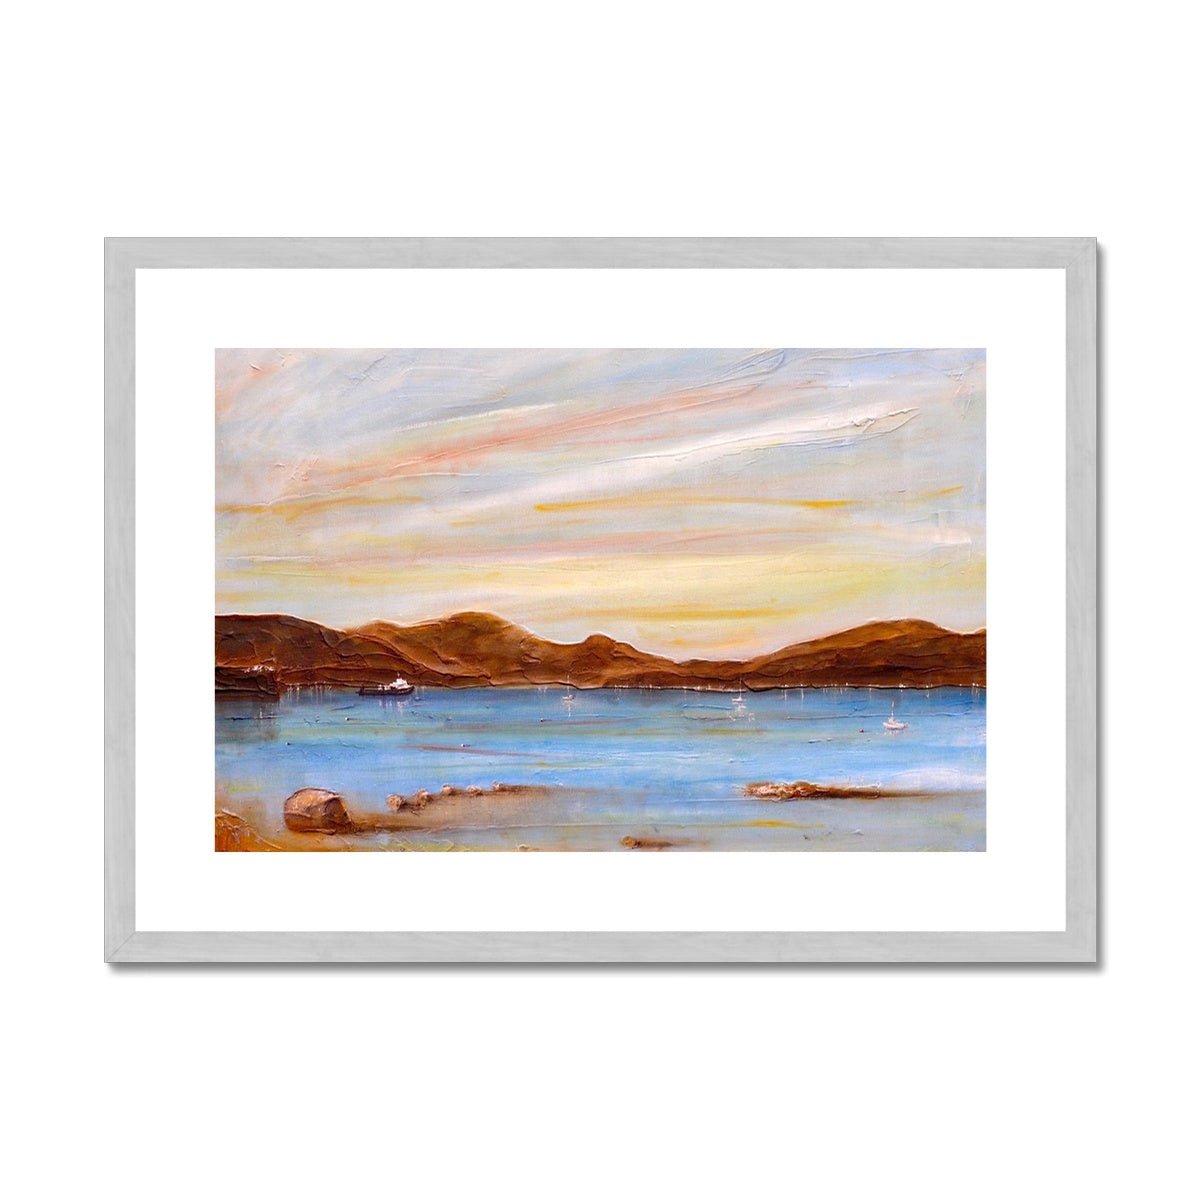 The Last Ferry To Dunoon Painting | Antique Framed & Mounted Prints From Scotland-Antique Framed & Mounted Prints-River Clyde Art Gallery-A2 Landscape-Silver Frame-Paintings, Prints, Homeware, Art Gifts From Scotland By Scottish Artist Kevin Hunter